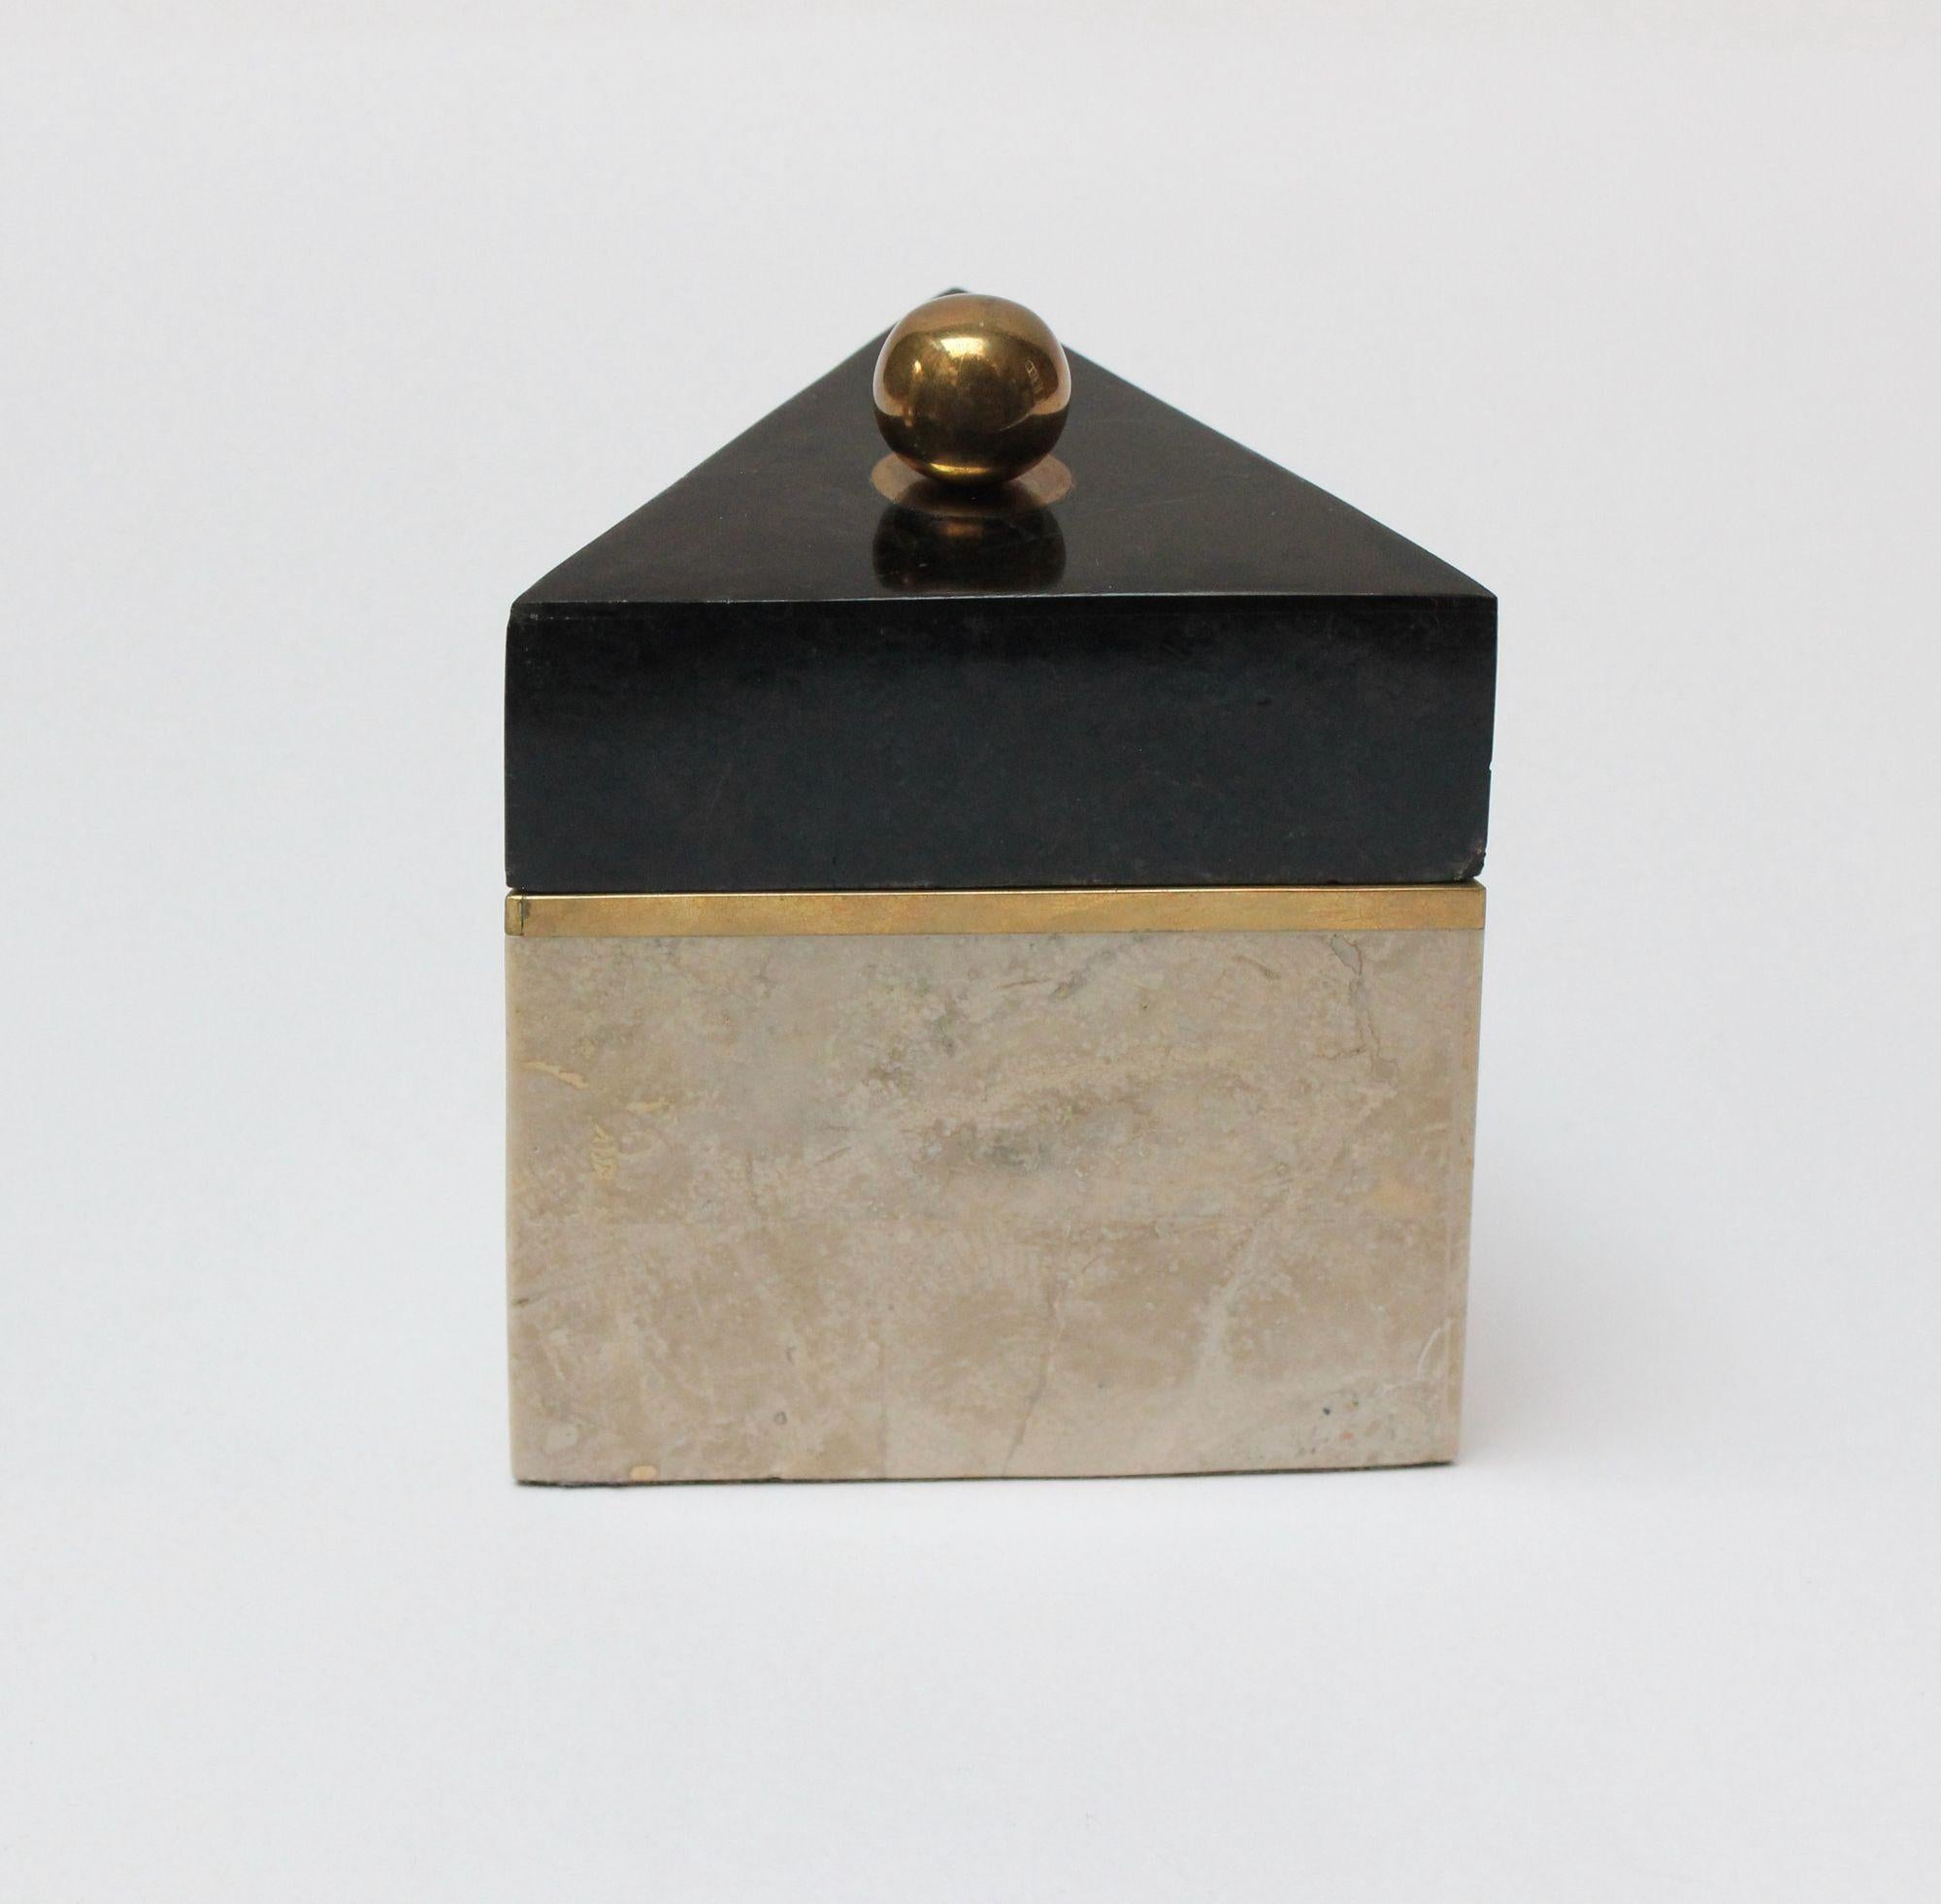 Vintage Maitland Smith attributed triangular box in tessellated marble and black stone with brass inlay and knob with black felted interior.
Small size and unique, triangular shape measuring H: 6.25